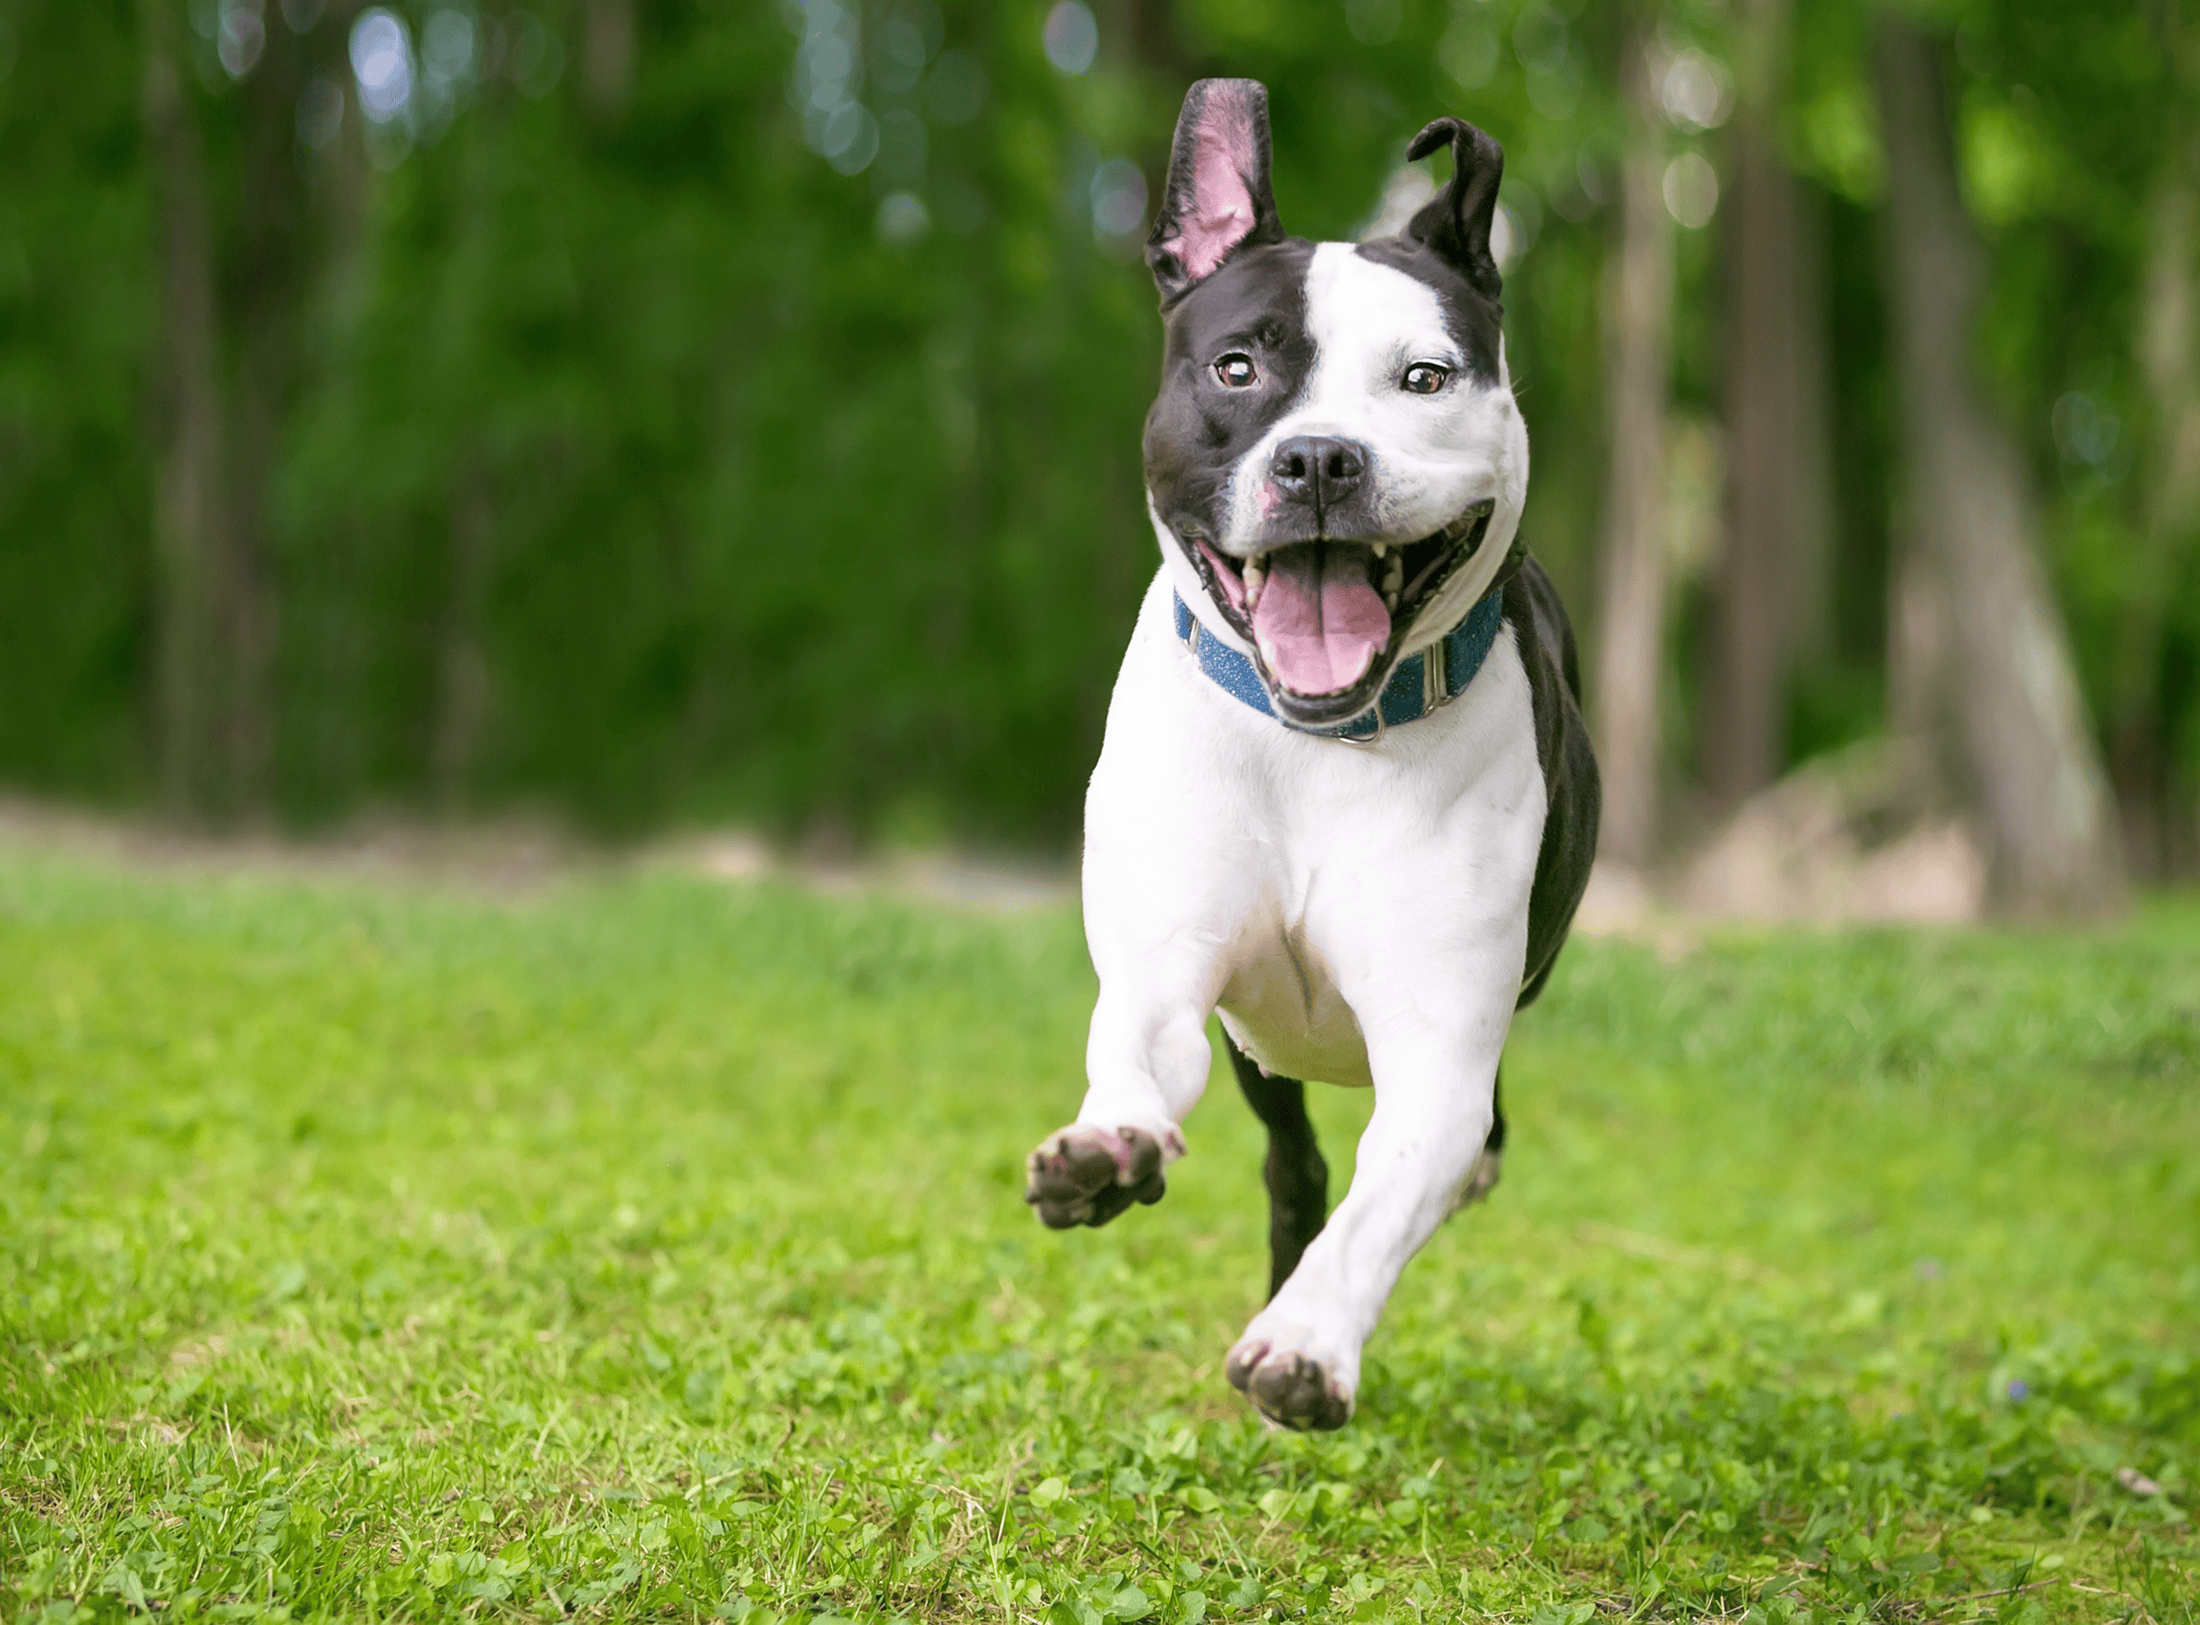 Dog zoomies can include a play bow, your dog running, and more. As pet owners, we don't need to stop dog zoomies. We need to enjoy our zooming dogs!!